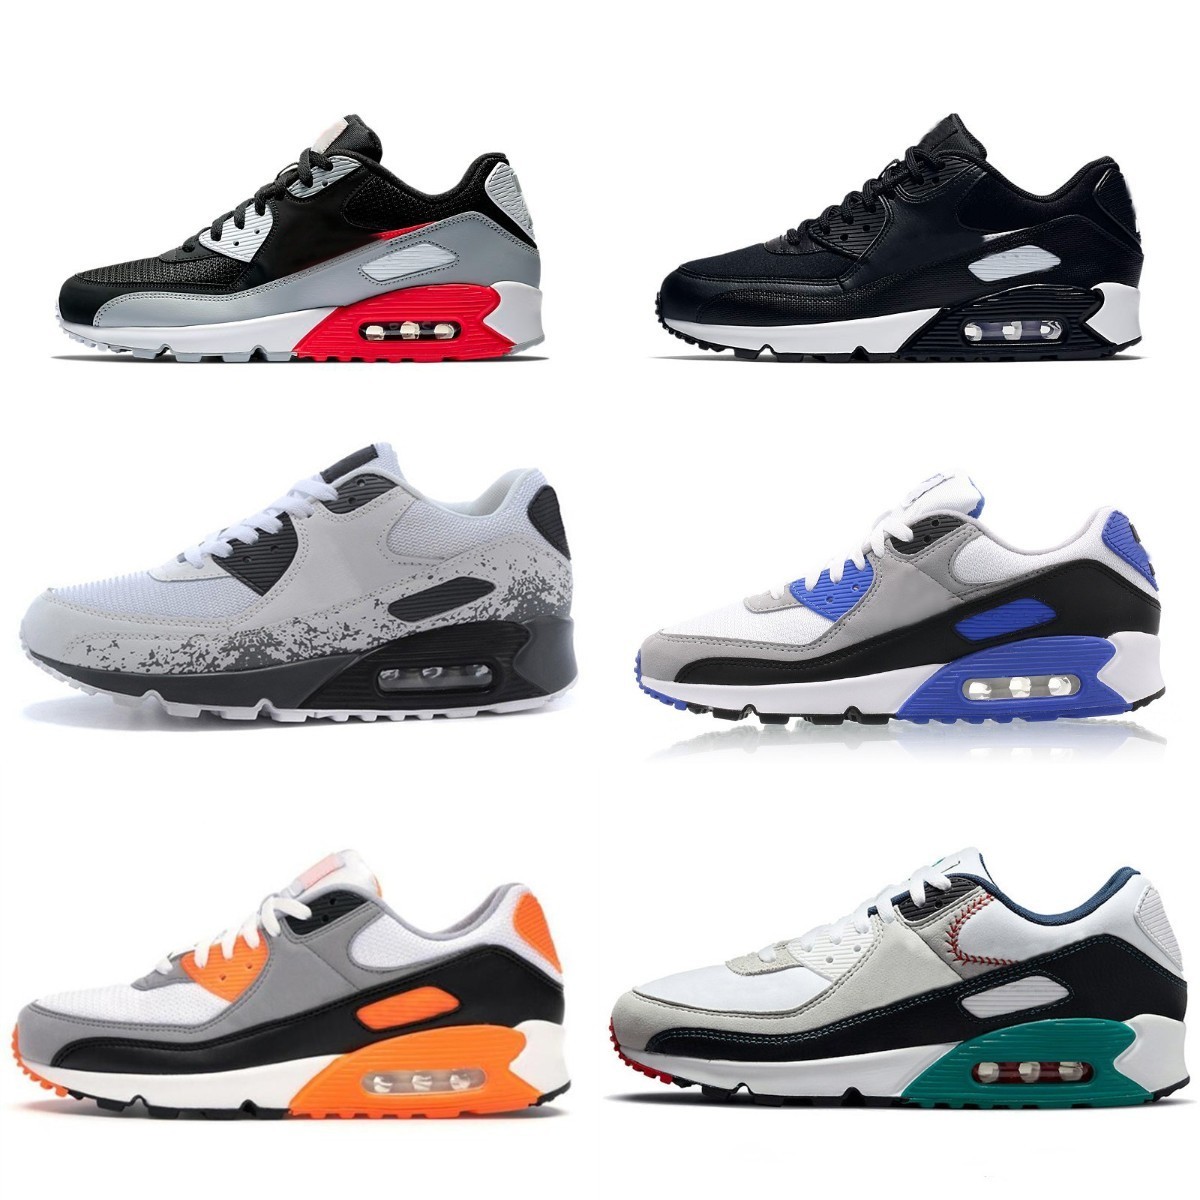 

2022 Designer Men Running Sports Shoes Triple White Black Red 90 Wolf Grey Polka Dot Infrared Total Orange Laser Blue Airs Hyper Grape Royal Women Trainer Sneakers S65, Please contact us